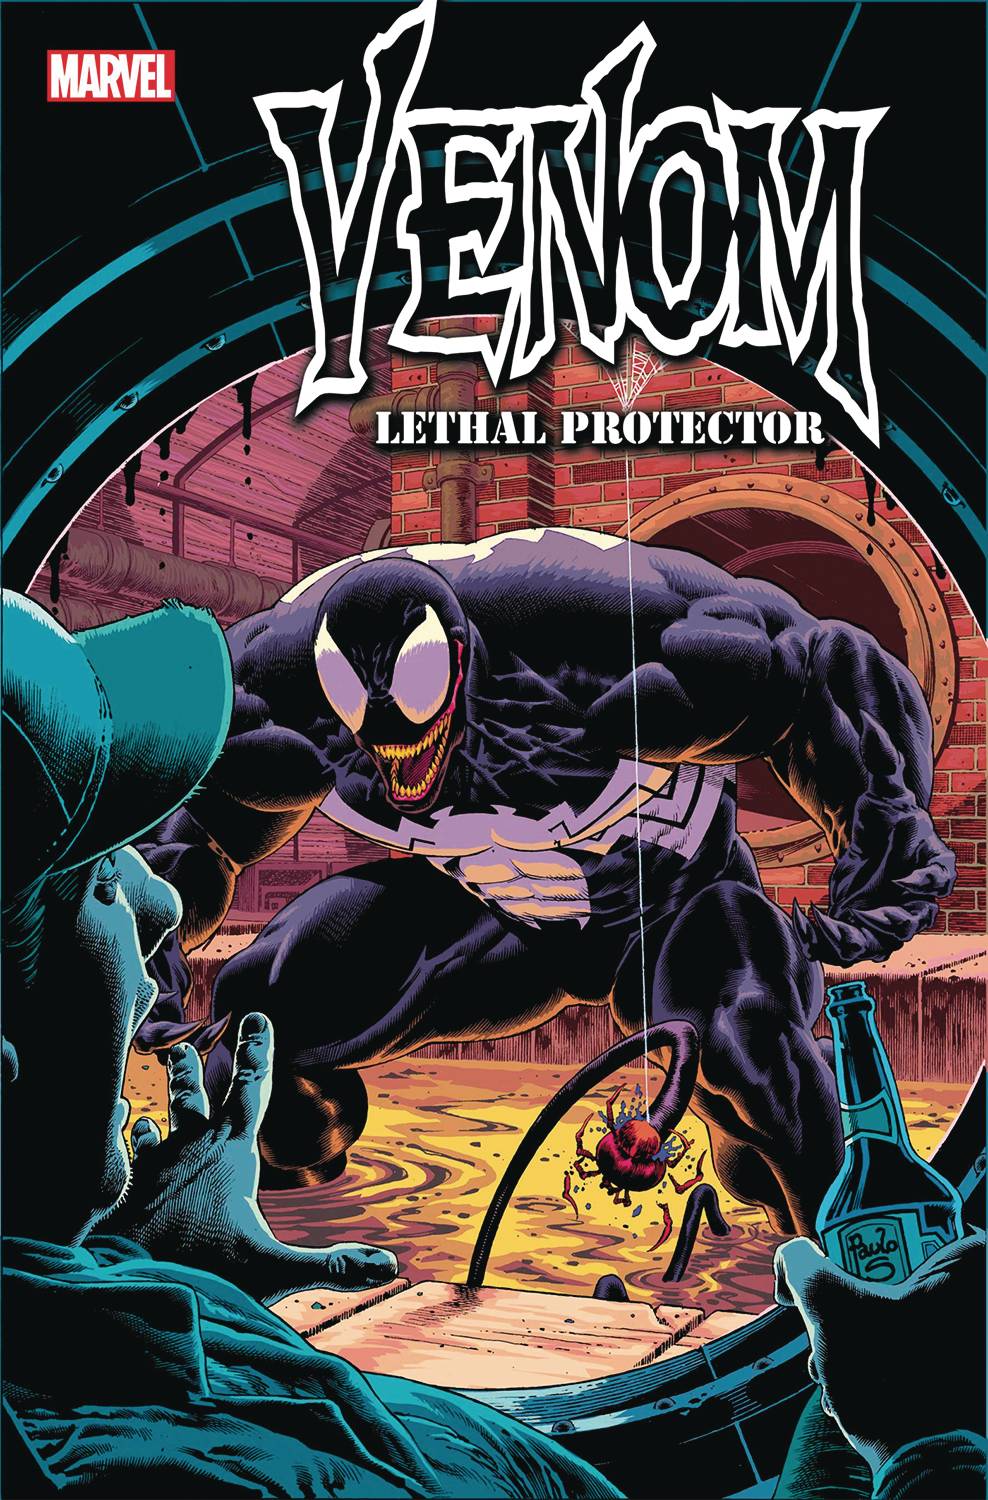 Comic Collection: Venom Lethal Protector #1 - #5